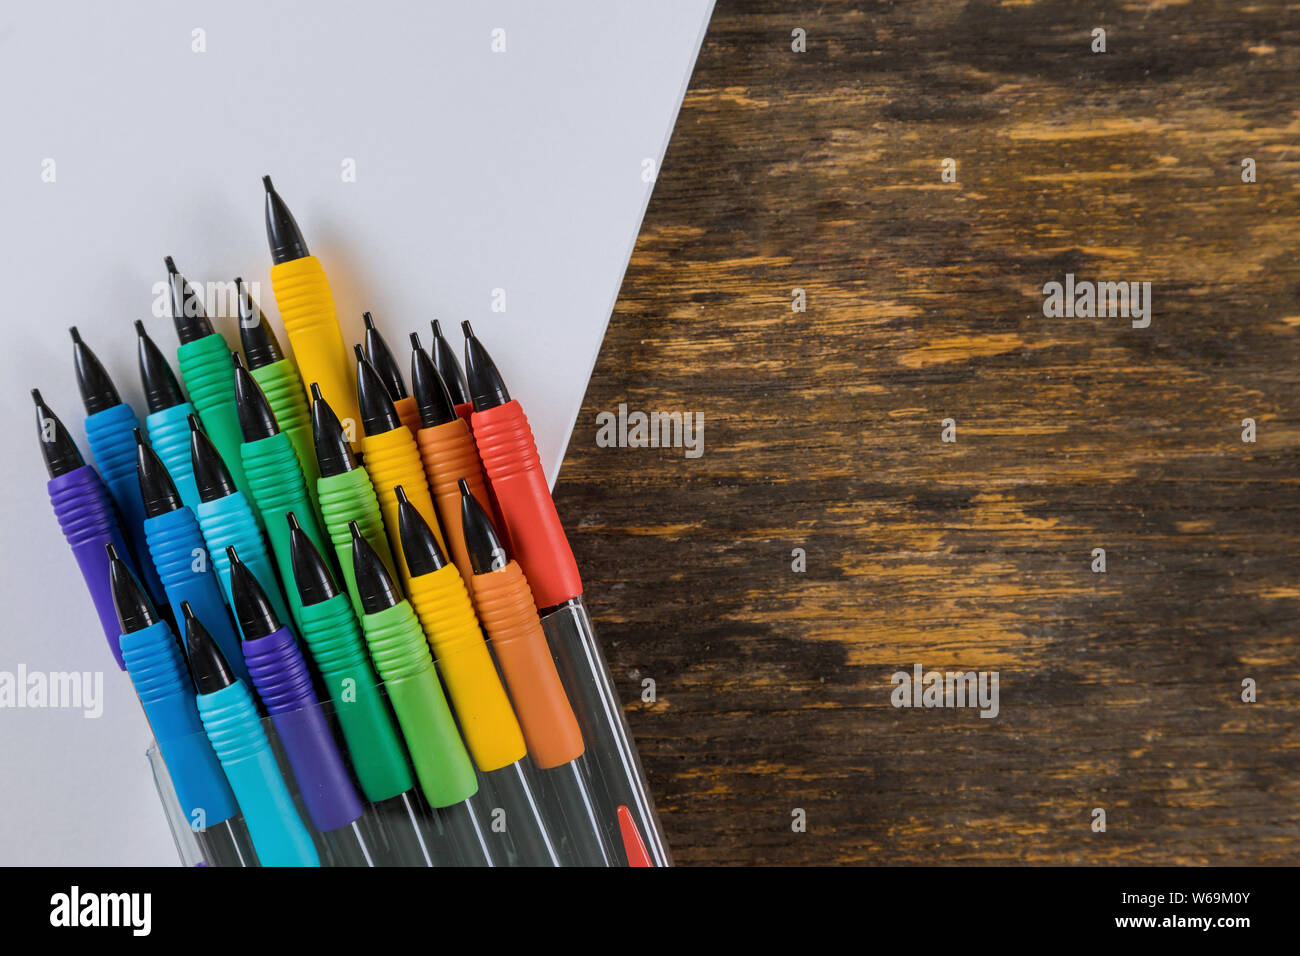 Pencils and drawing or sketch pad on wooden background. School